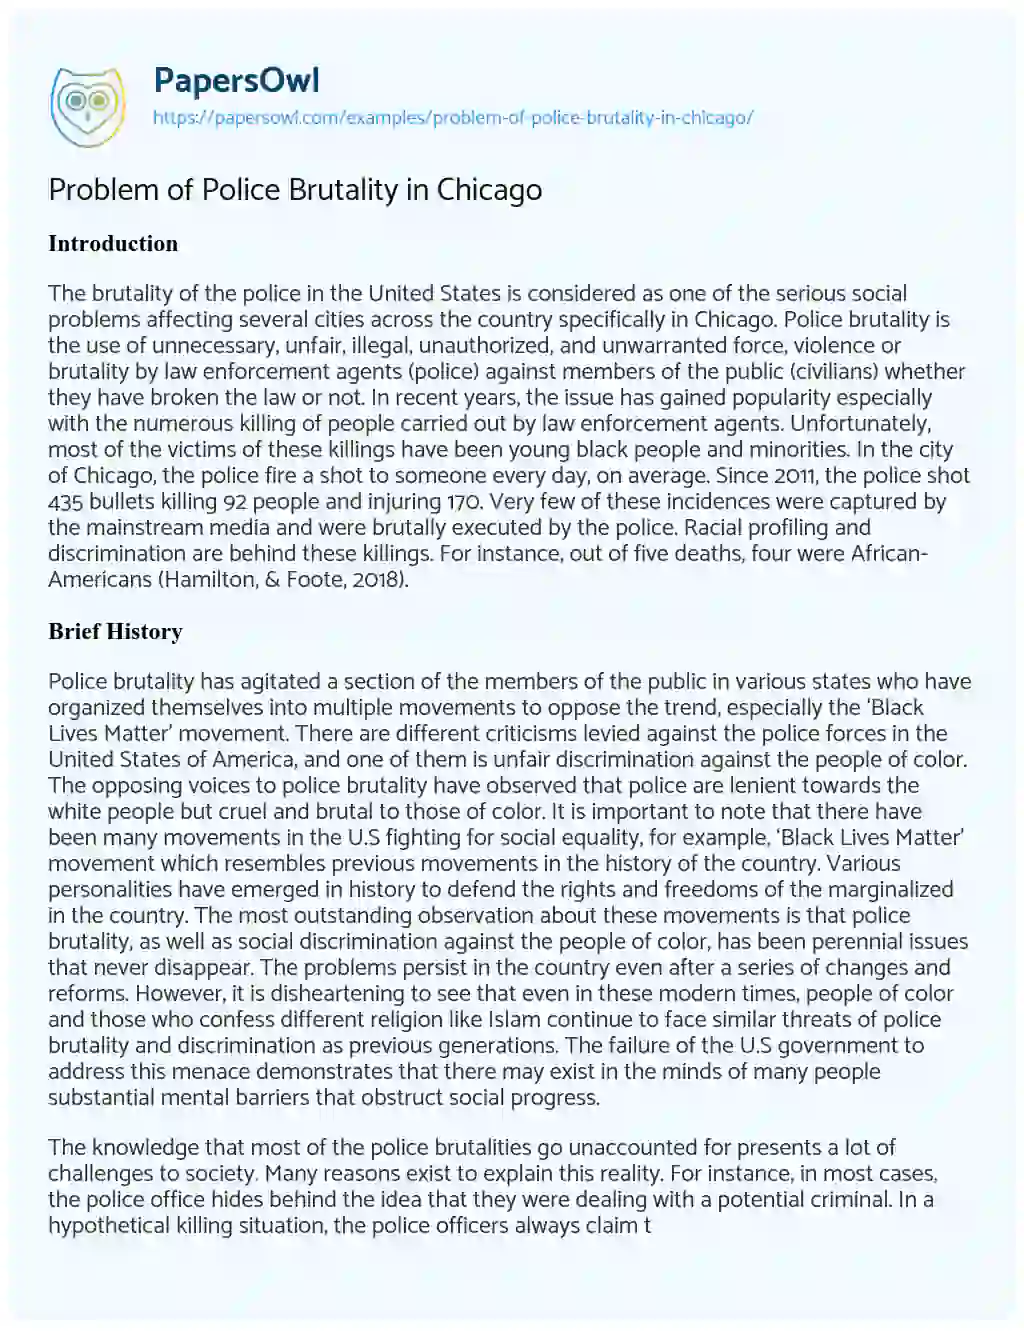 Problem of Police Brutality in Chicago essay